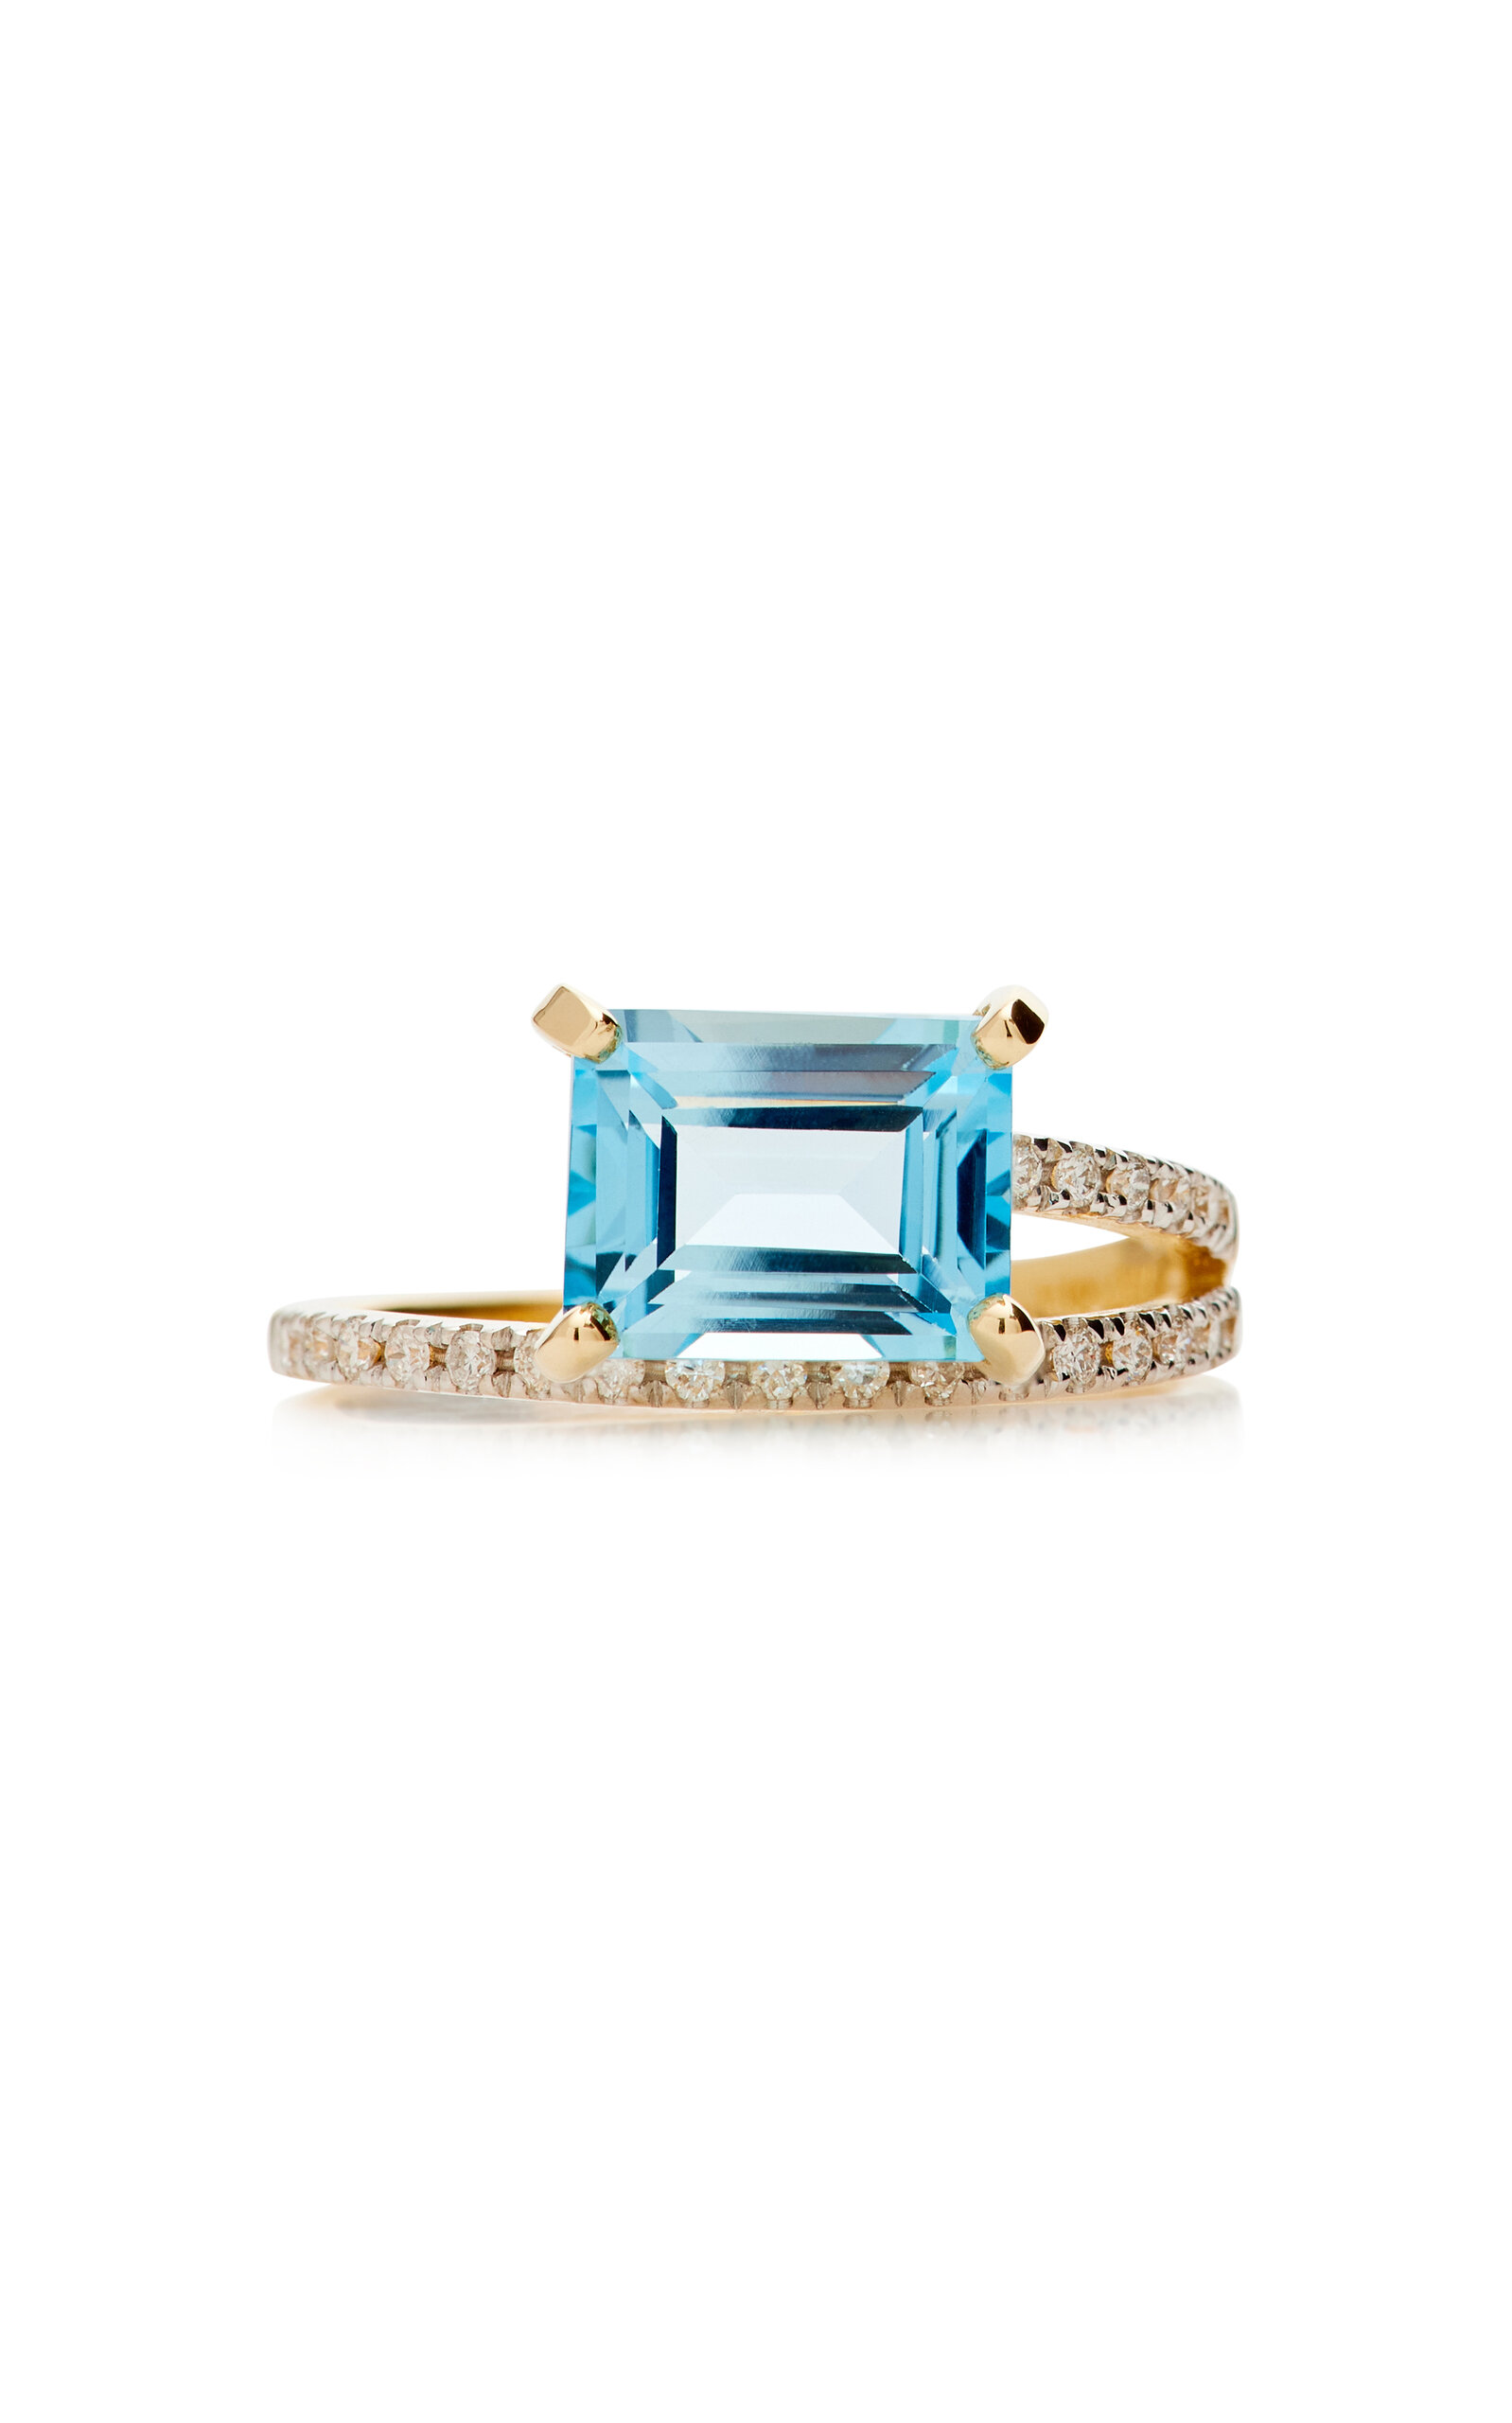 Mateo Point Of Focus 14k Yellow Gold Topaz; Diamond Ring In Blue